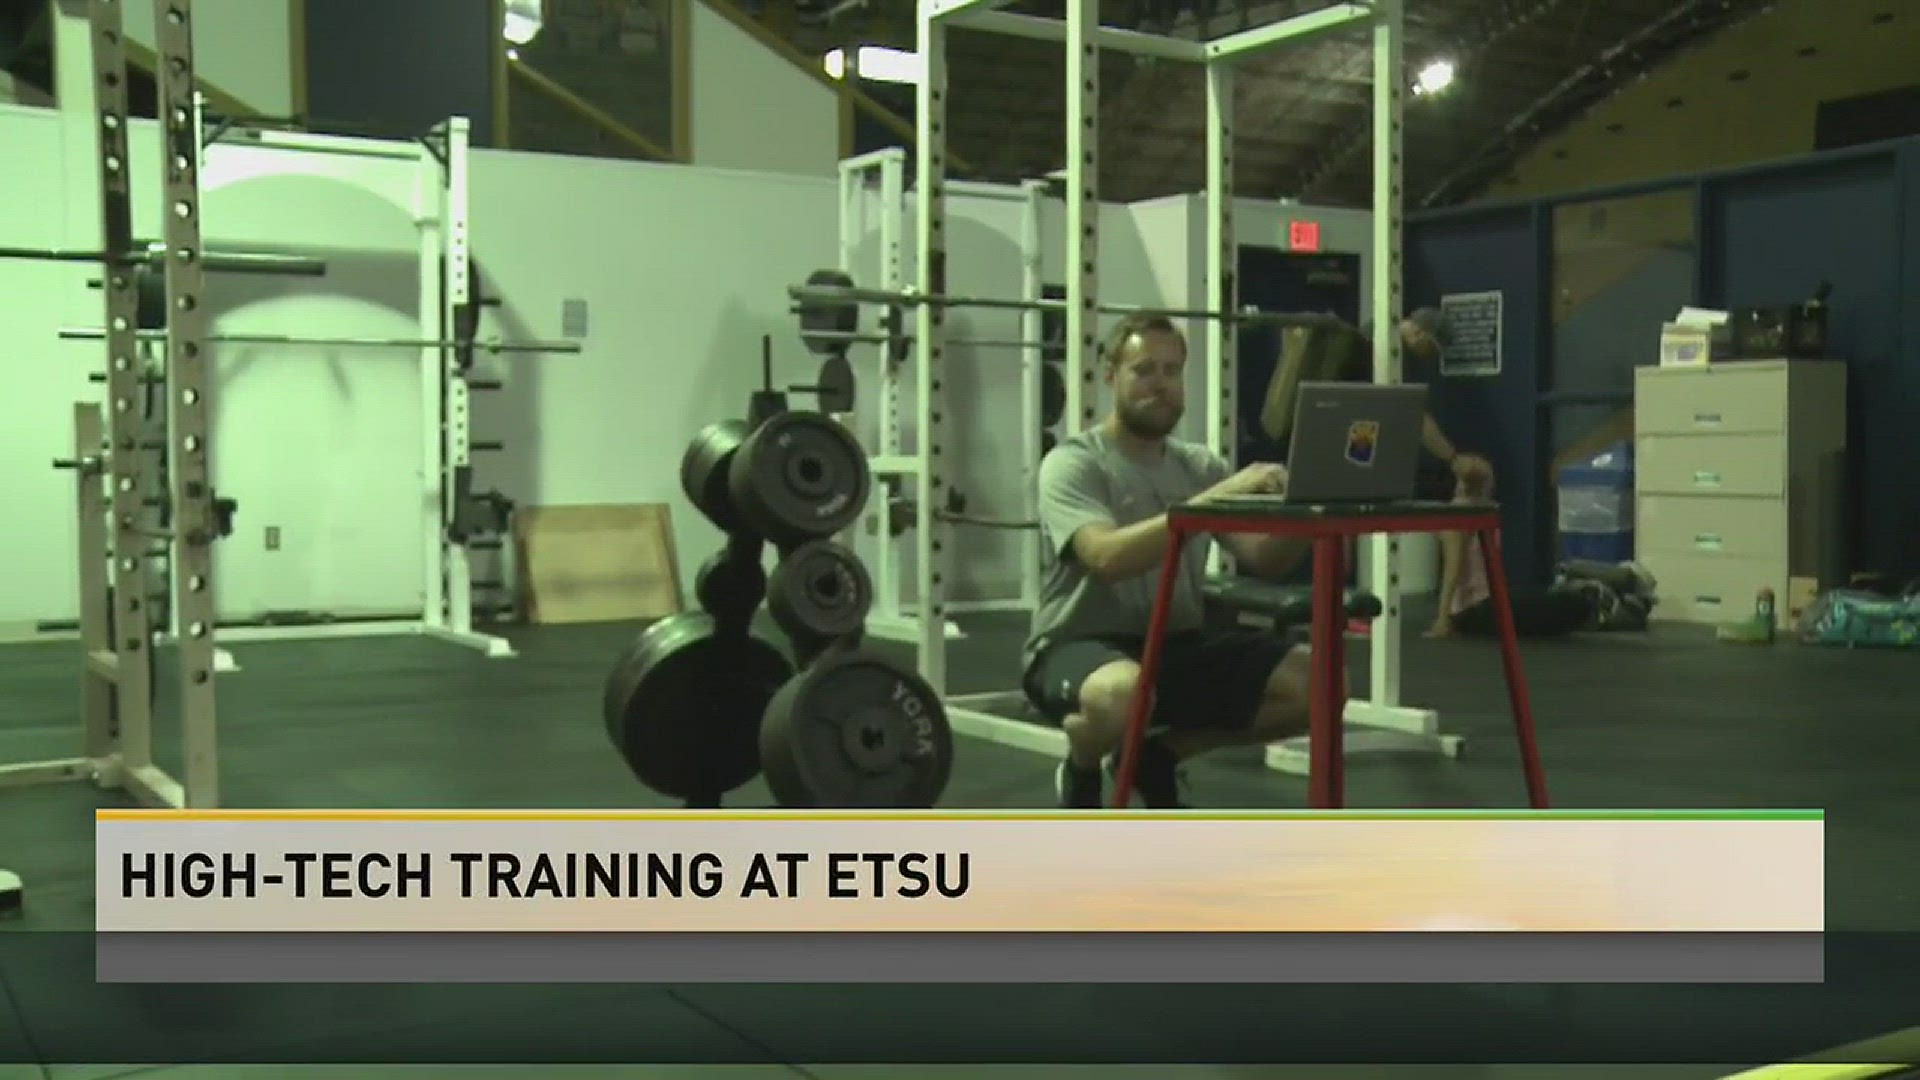 How technology at East Tennessee State University is changing the way athletes train.